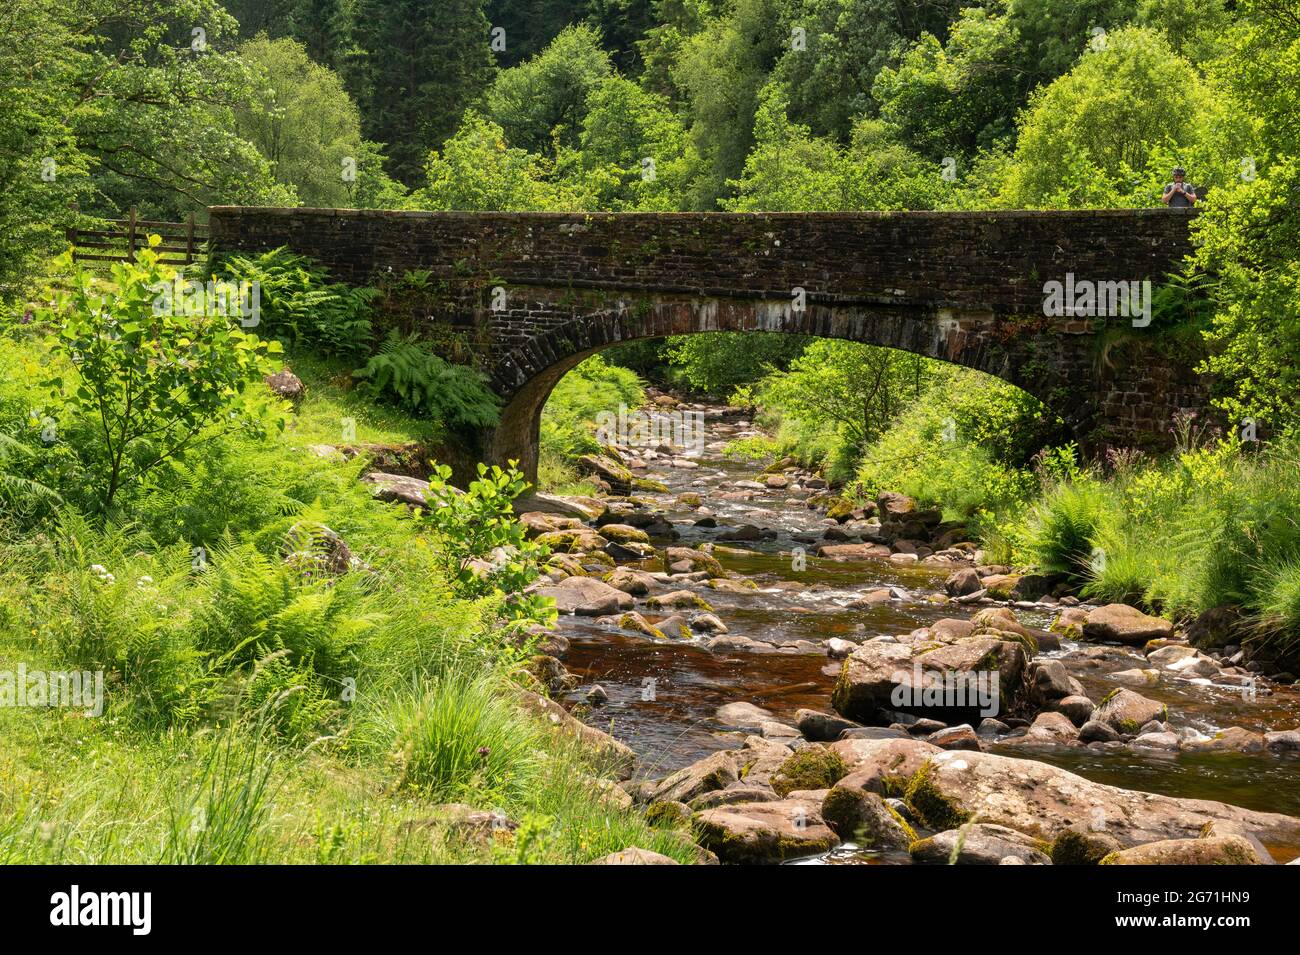 A view of a stone bridge over a rocky stream with greenery along the bank with a man standing on bridge Stock Photo